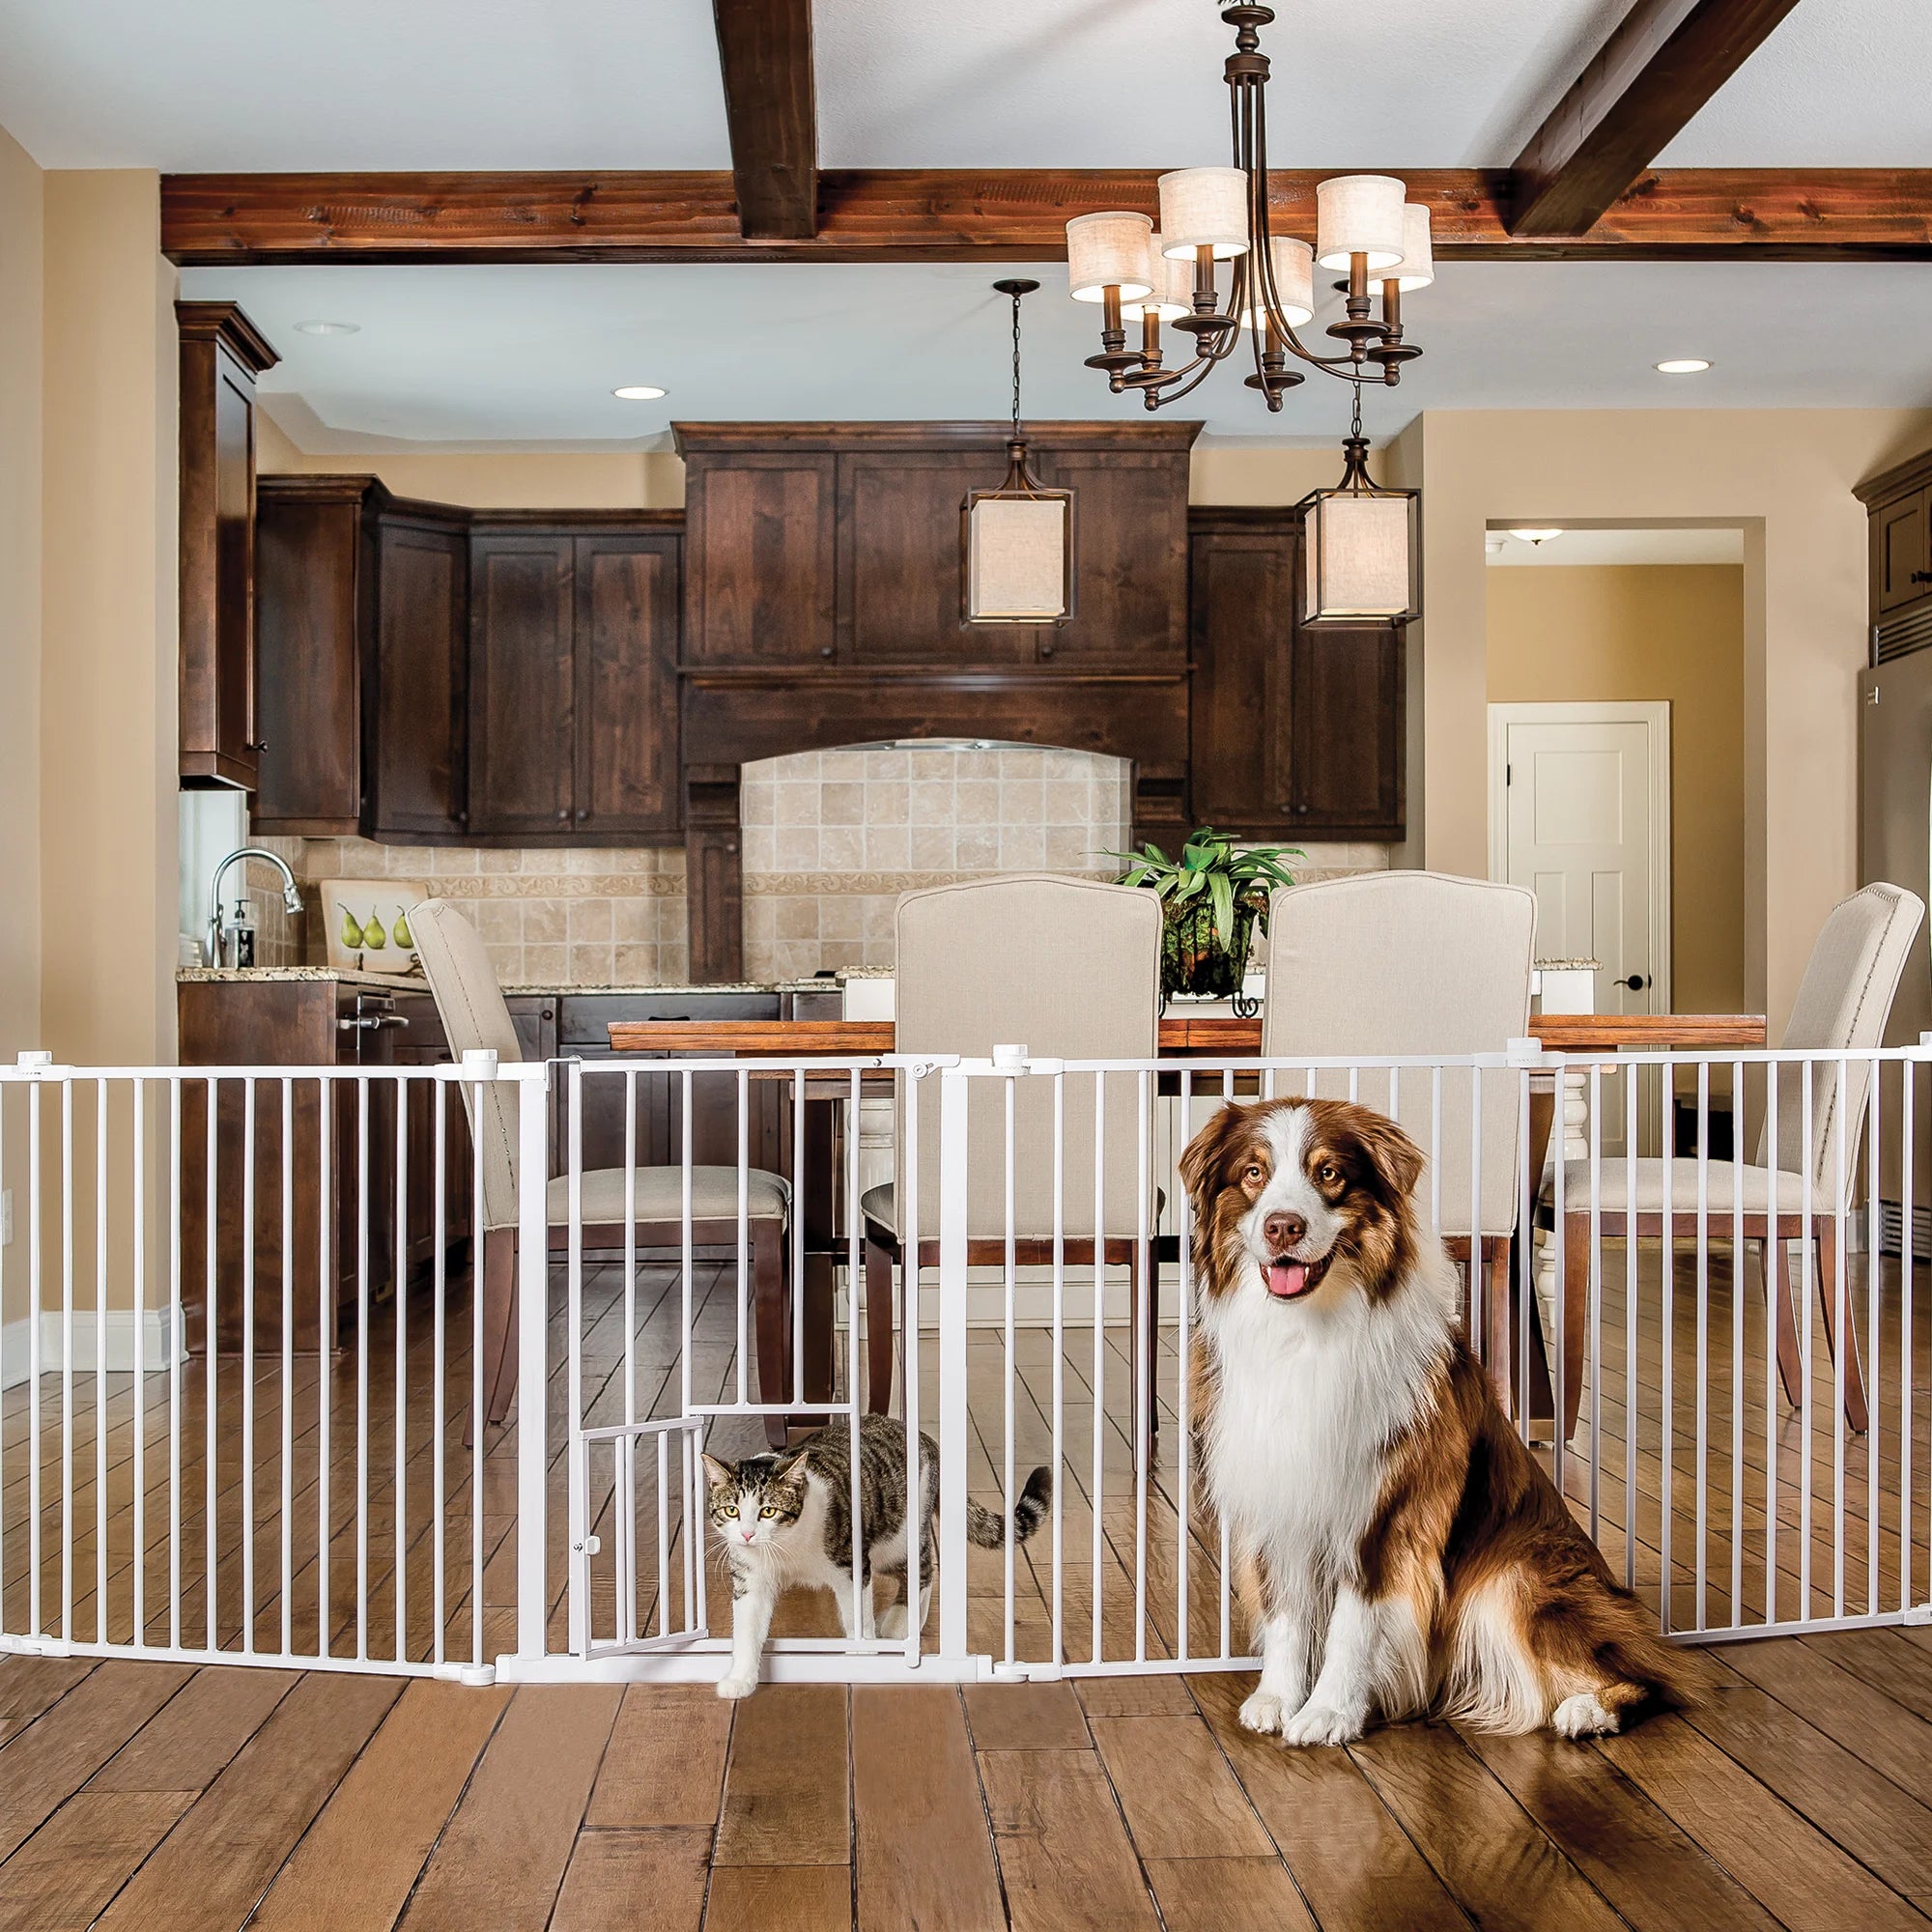 2-in-1 Super Wide Pet Pen & Gate in the kitchen with a dog in front of it with a cat walking through the Small Pet Door.